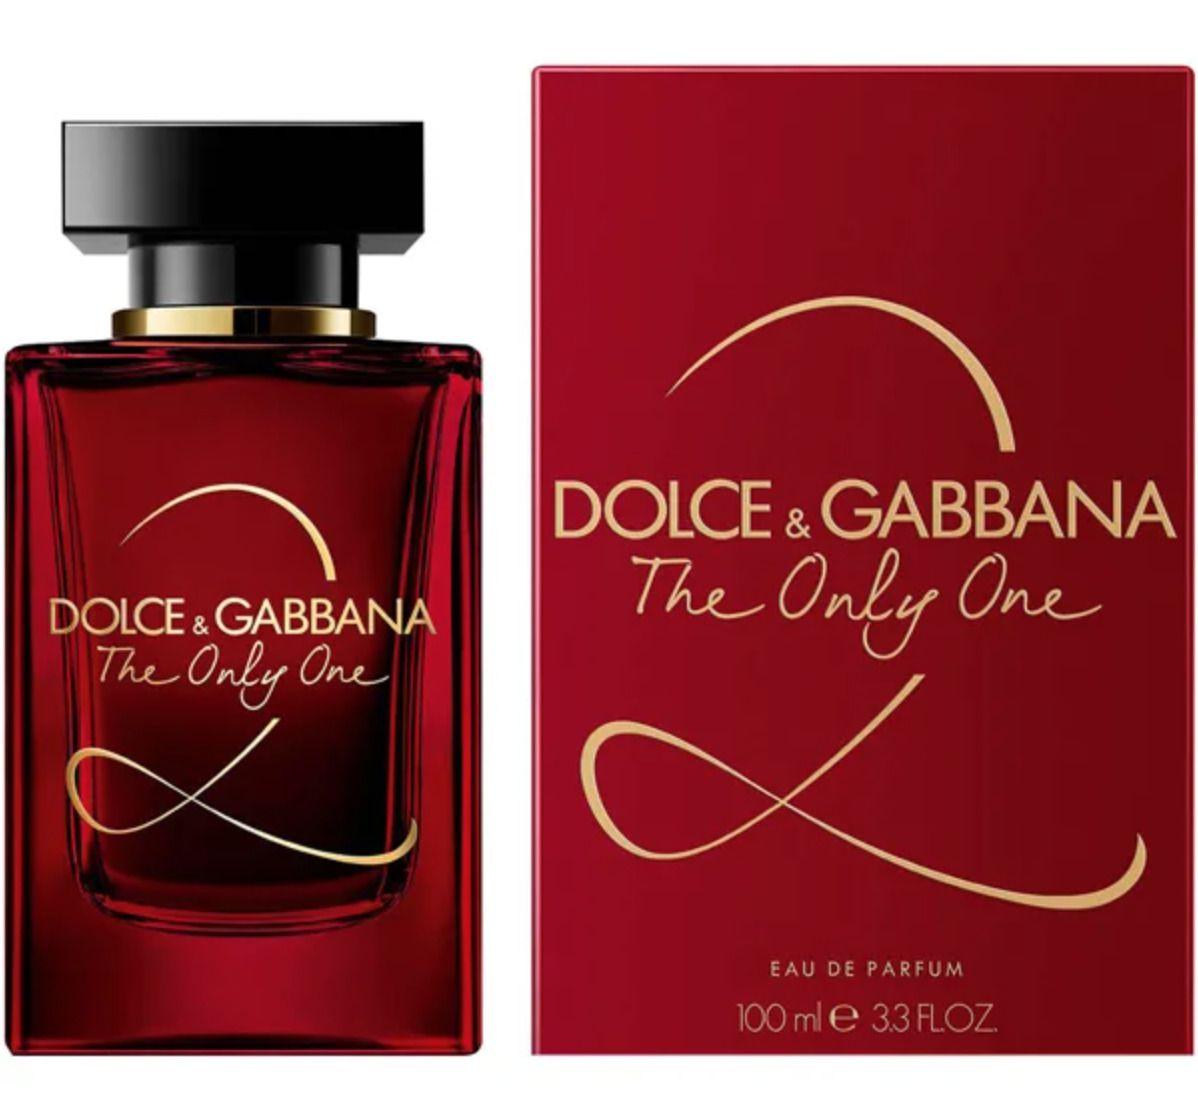 Духи dolce only one. Dolce Gabbana the only one 2 100 мл. Духи Дольче Габбана the only one. Dolce Gabbana духи the one 100ml. Dolce & Gabbana the only one, EDP., 100 ml.